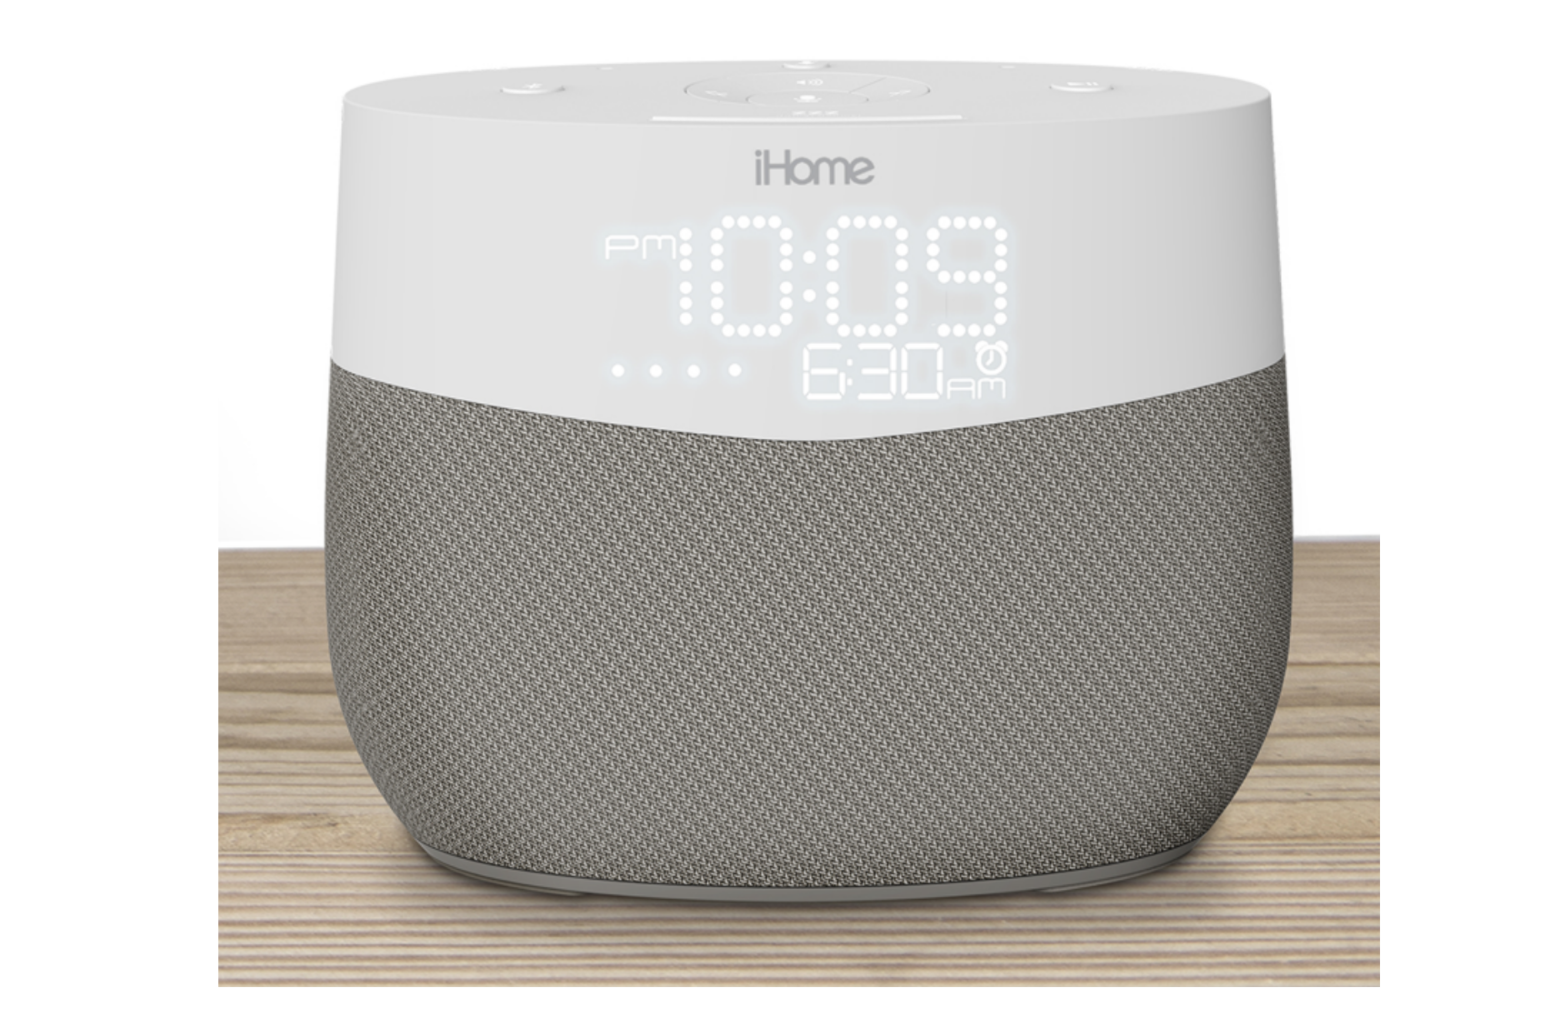 does ihome work with google home